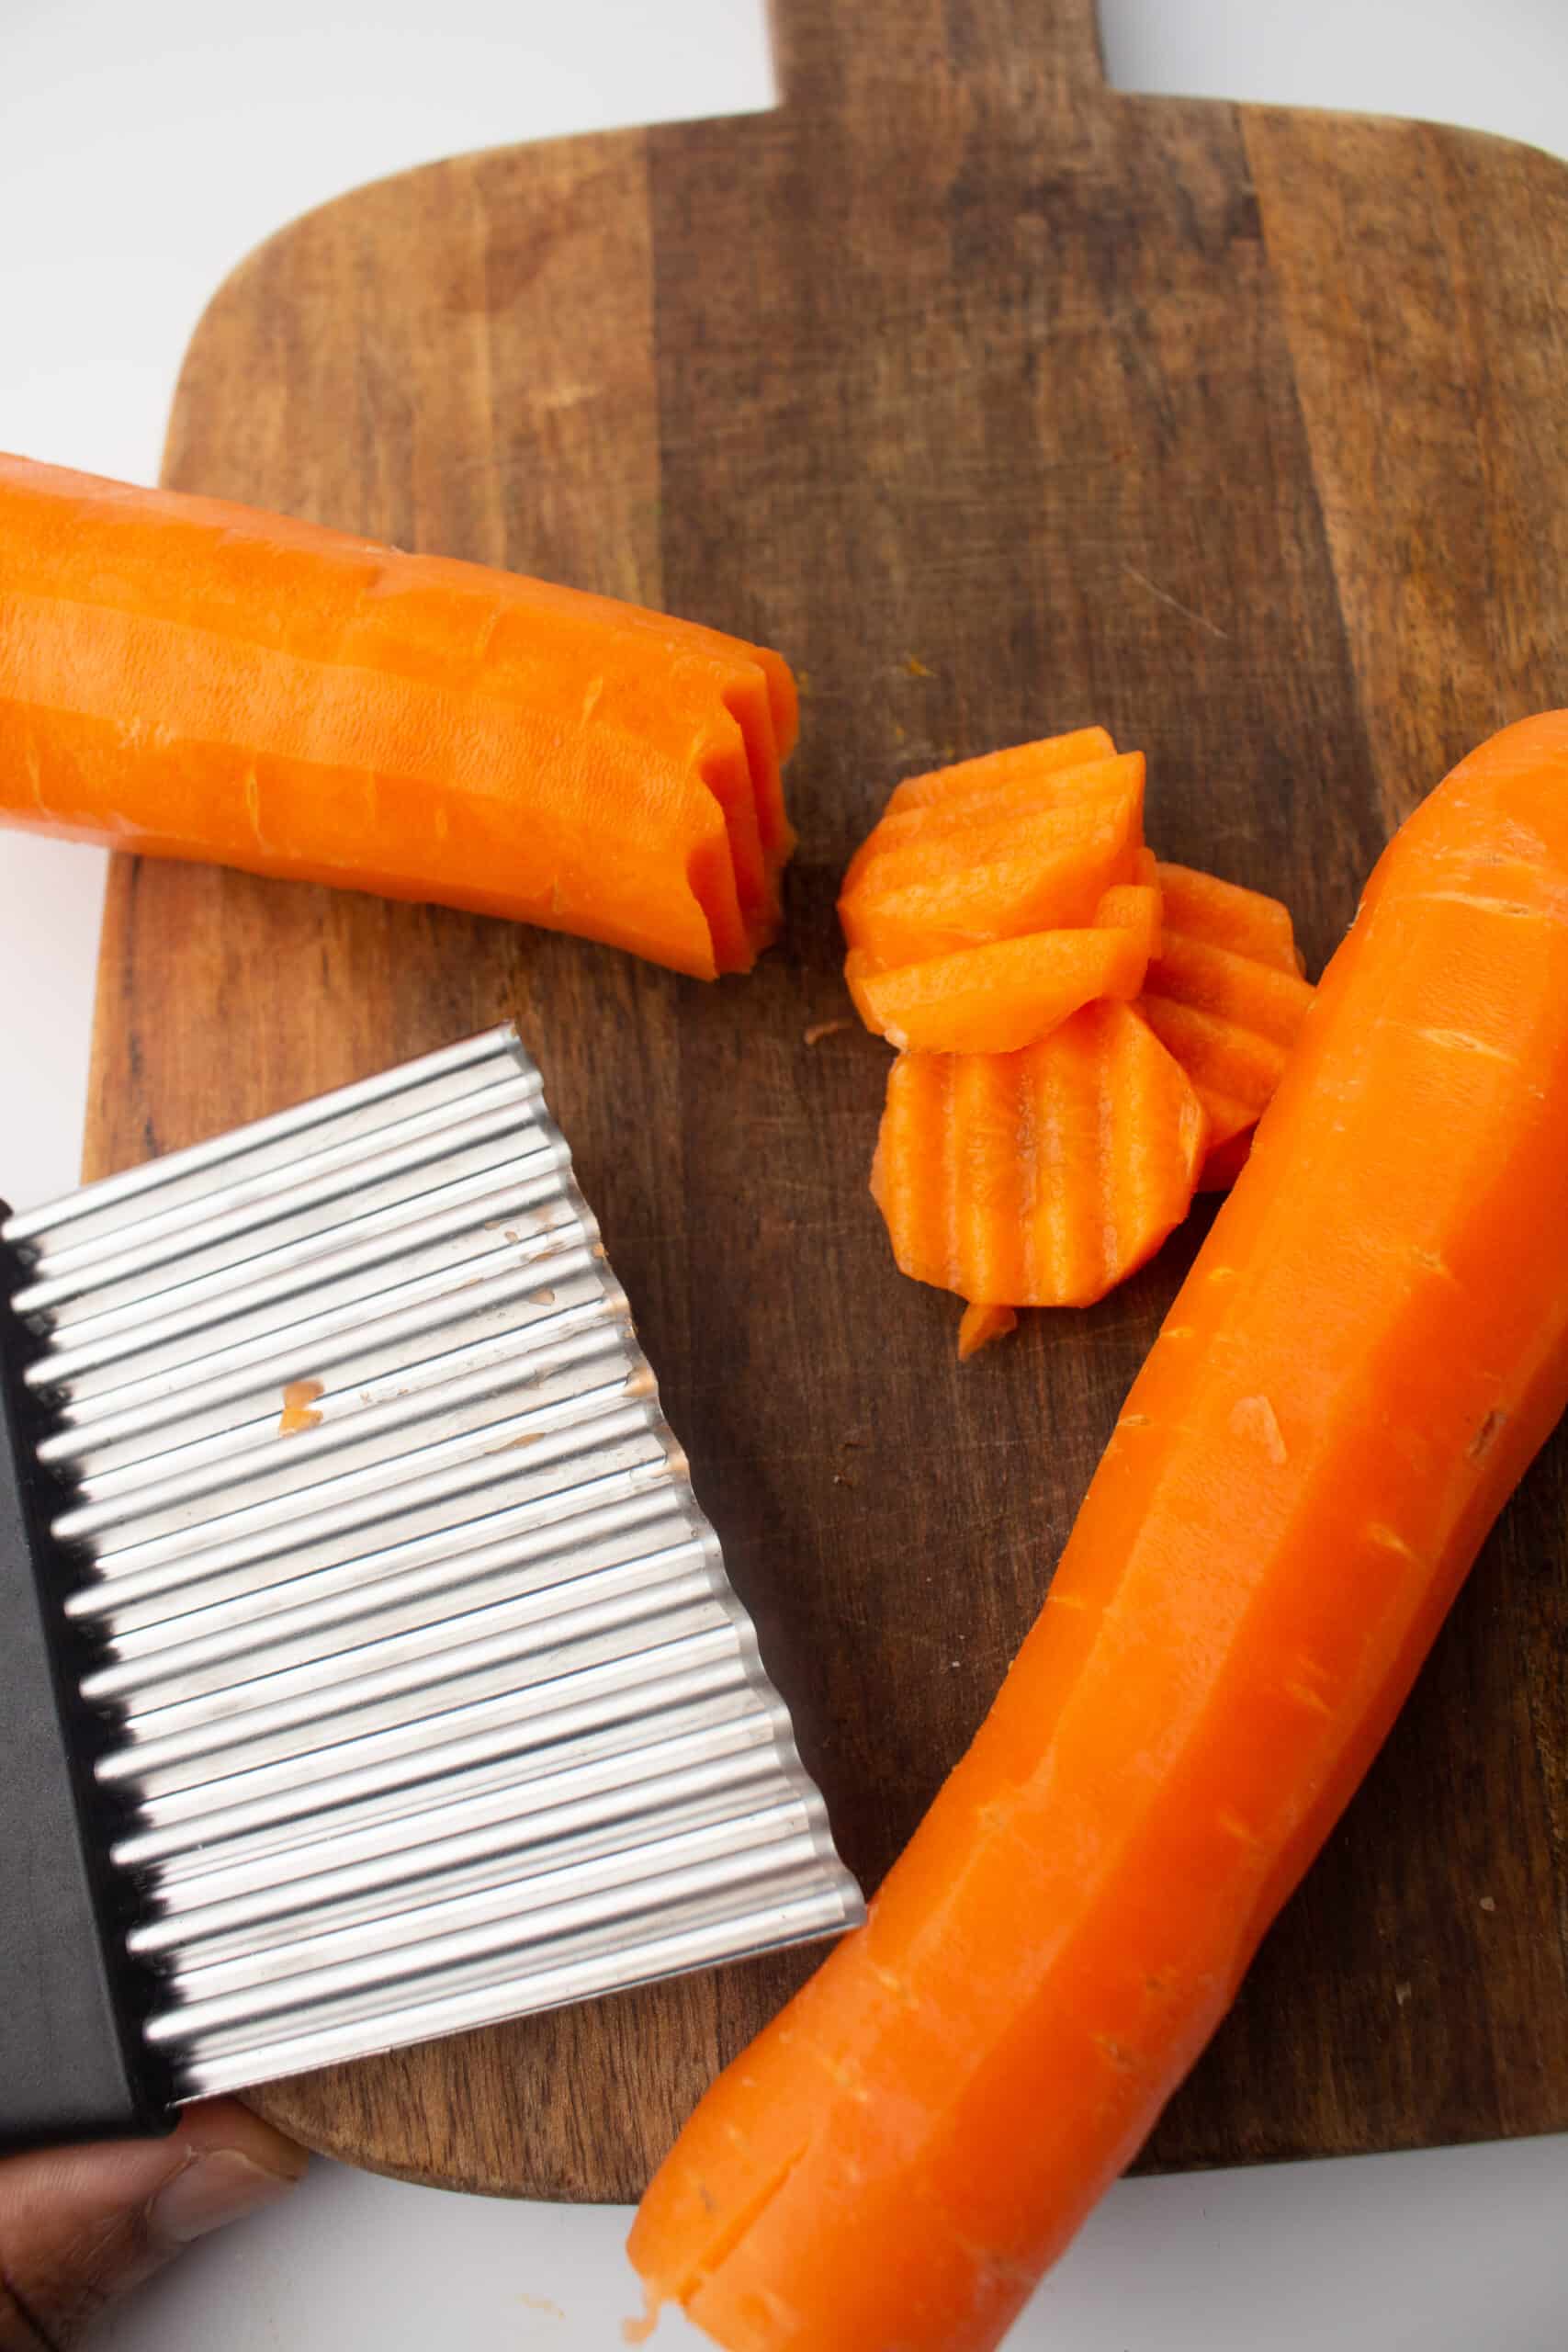 Slicing the carrots